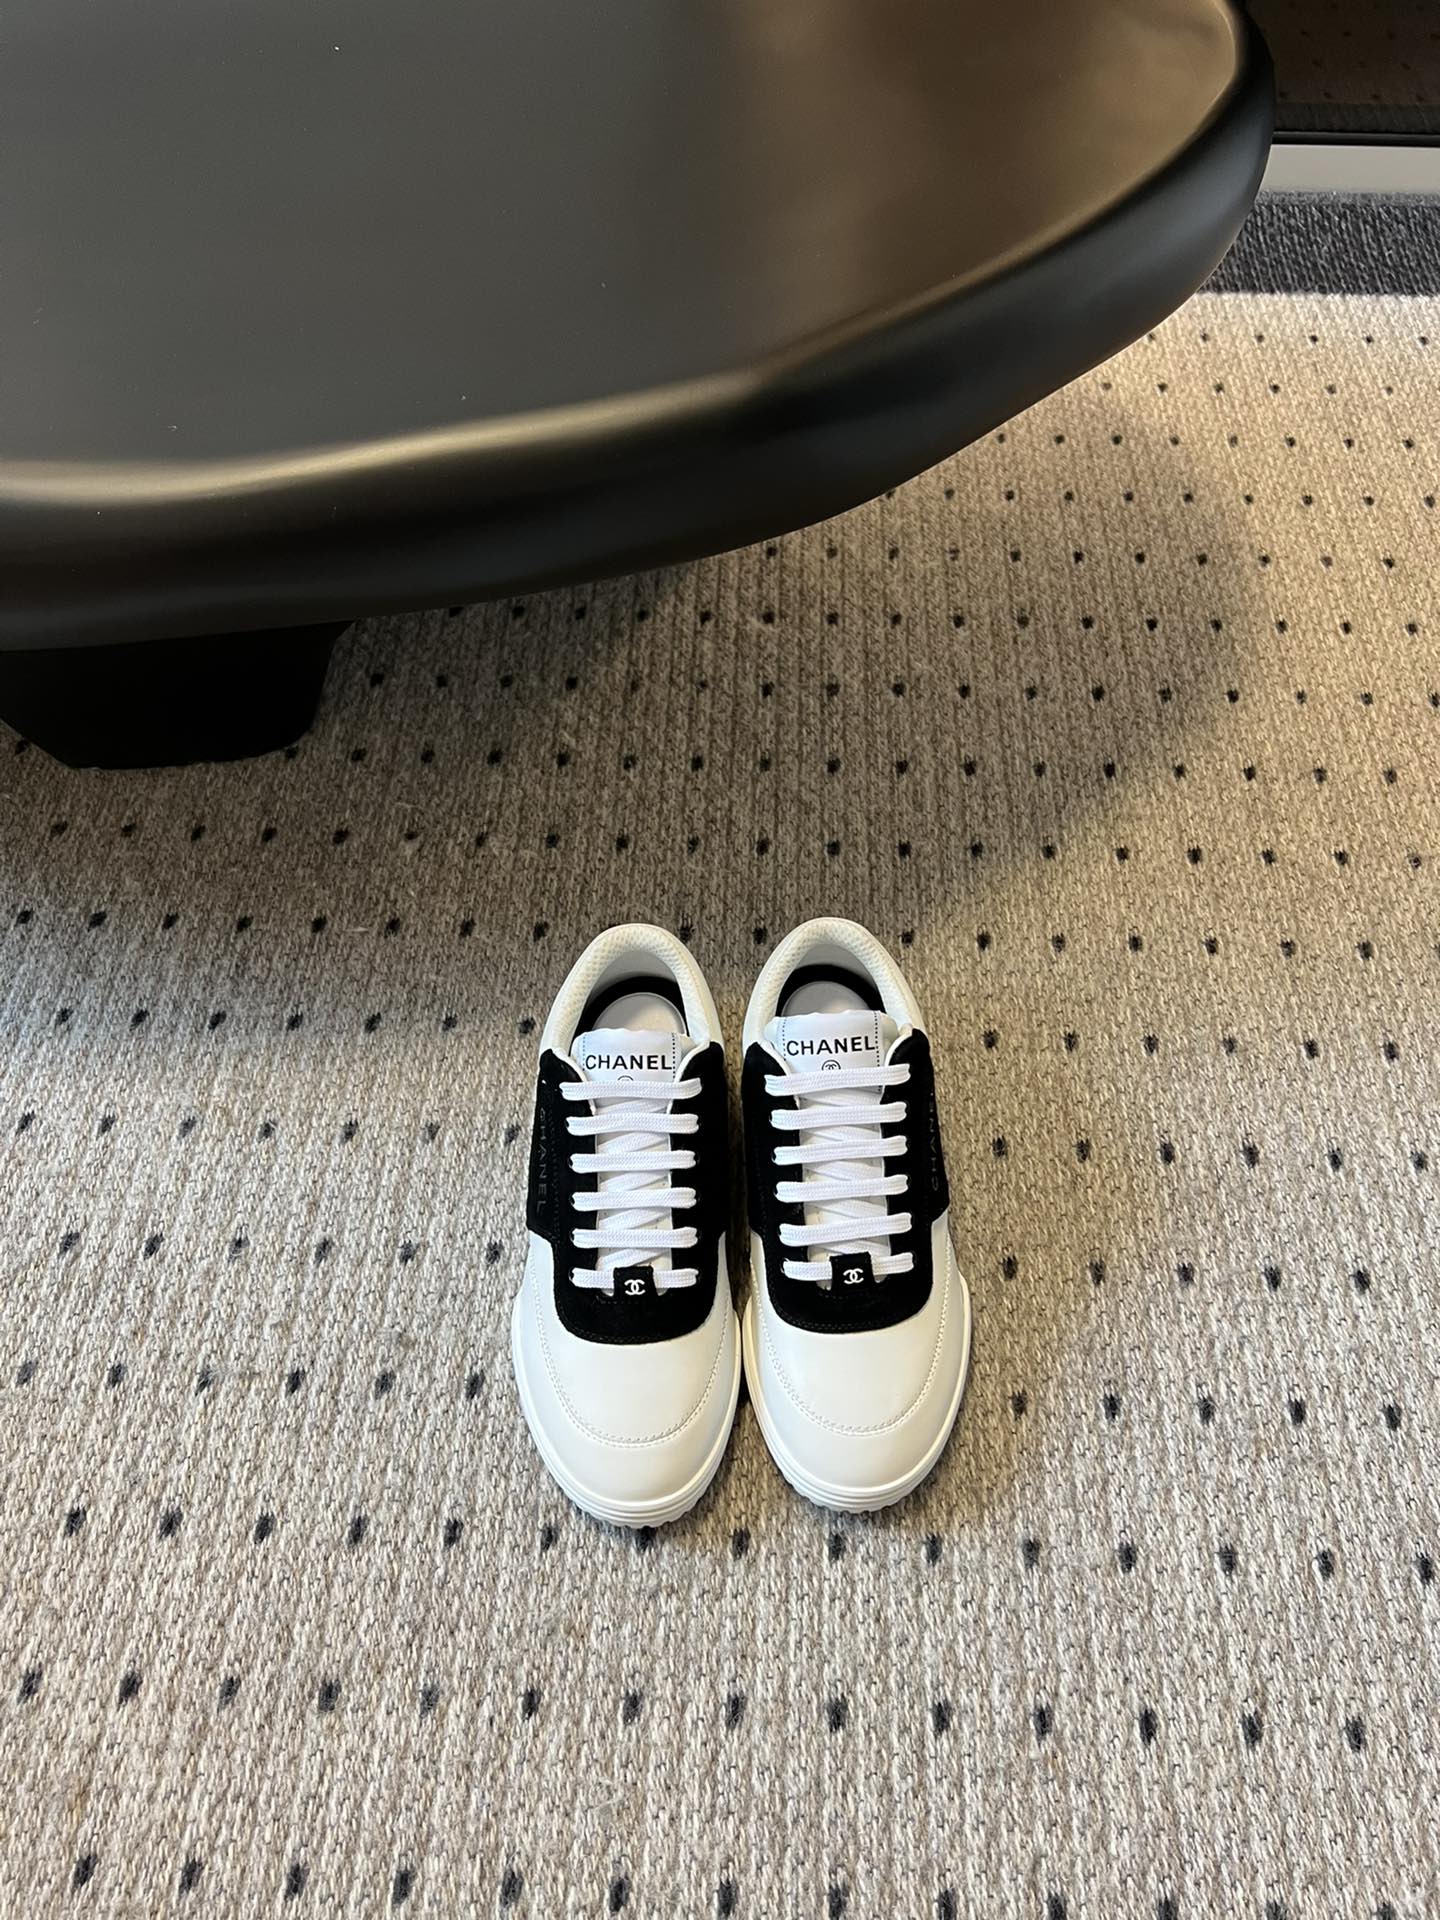 Chanel Sneakers Casual Shoes White Cowhide TPU Spring Collection Casual